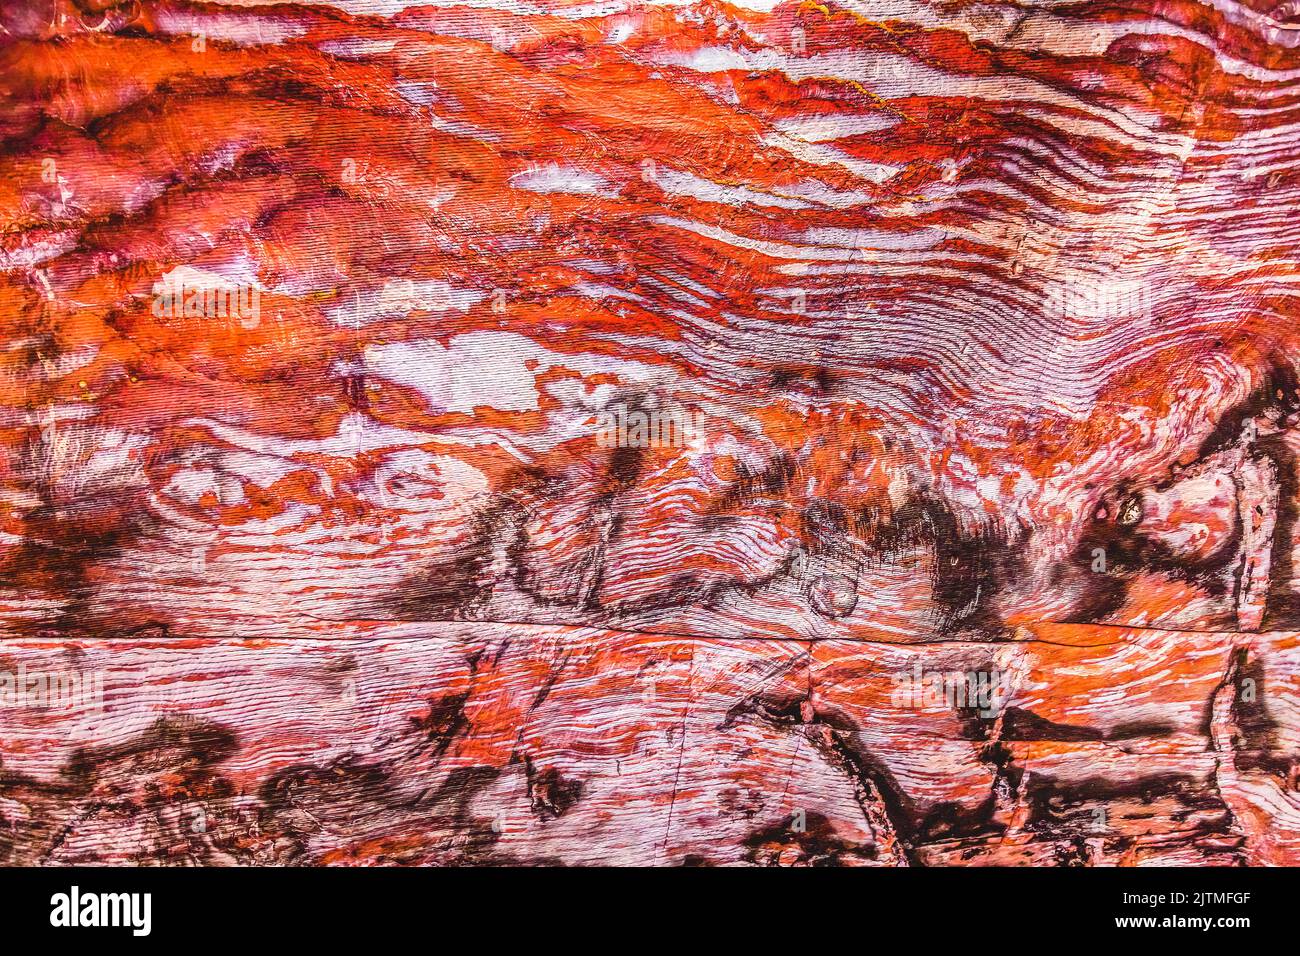 Orange Red Black White Rock Tomb Ceiling Abstract, Street of Facades Petra Jordan Built by Nabataens in 200 BC to 400 AD Tomb walls create many abstra Stock Photo